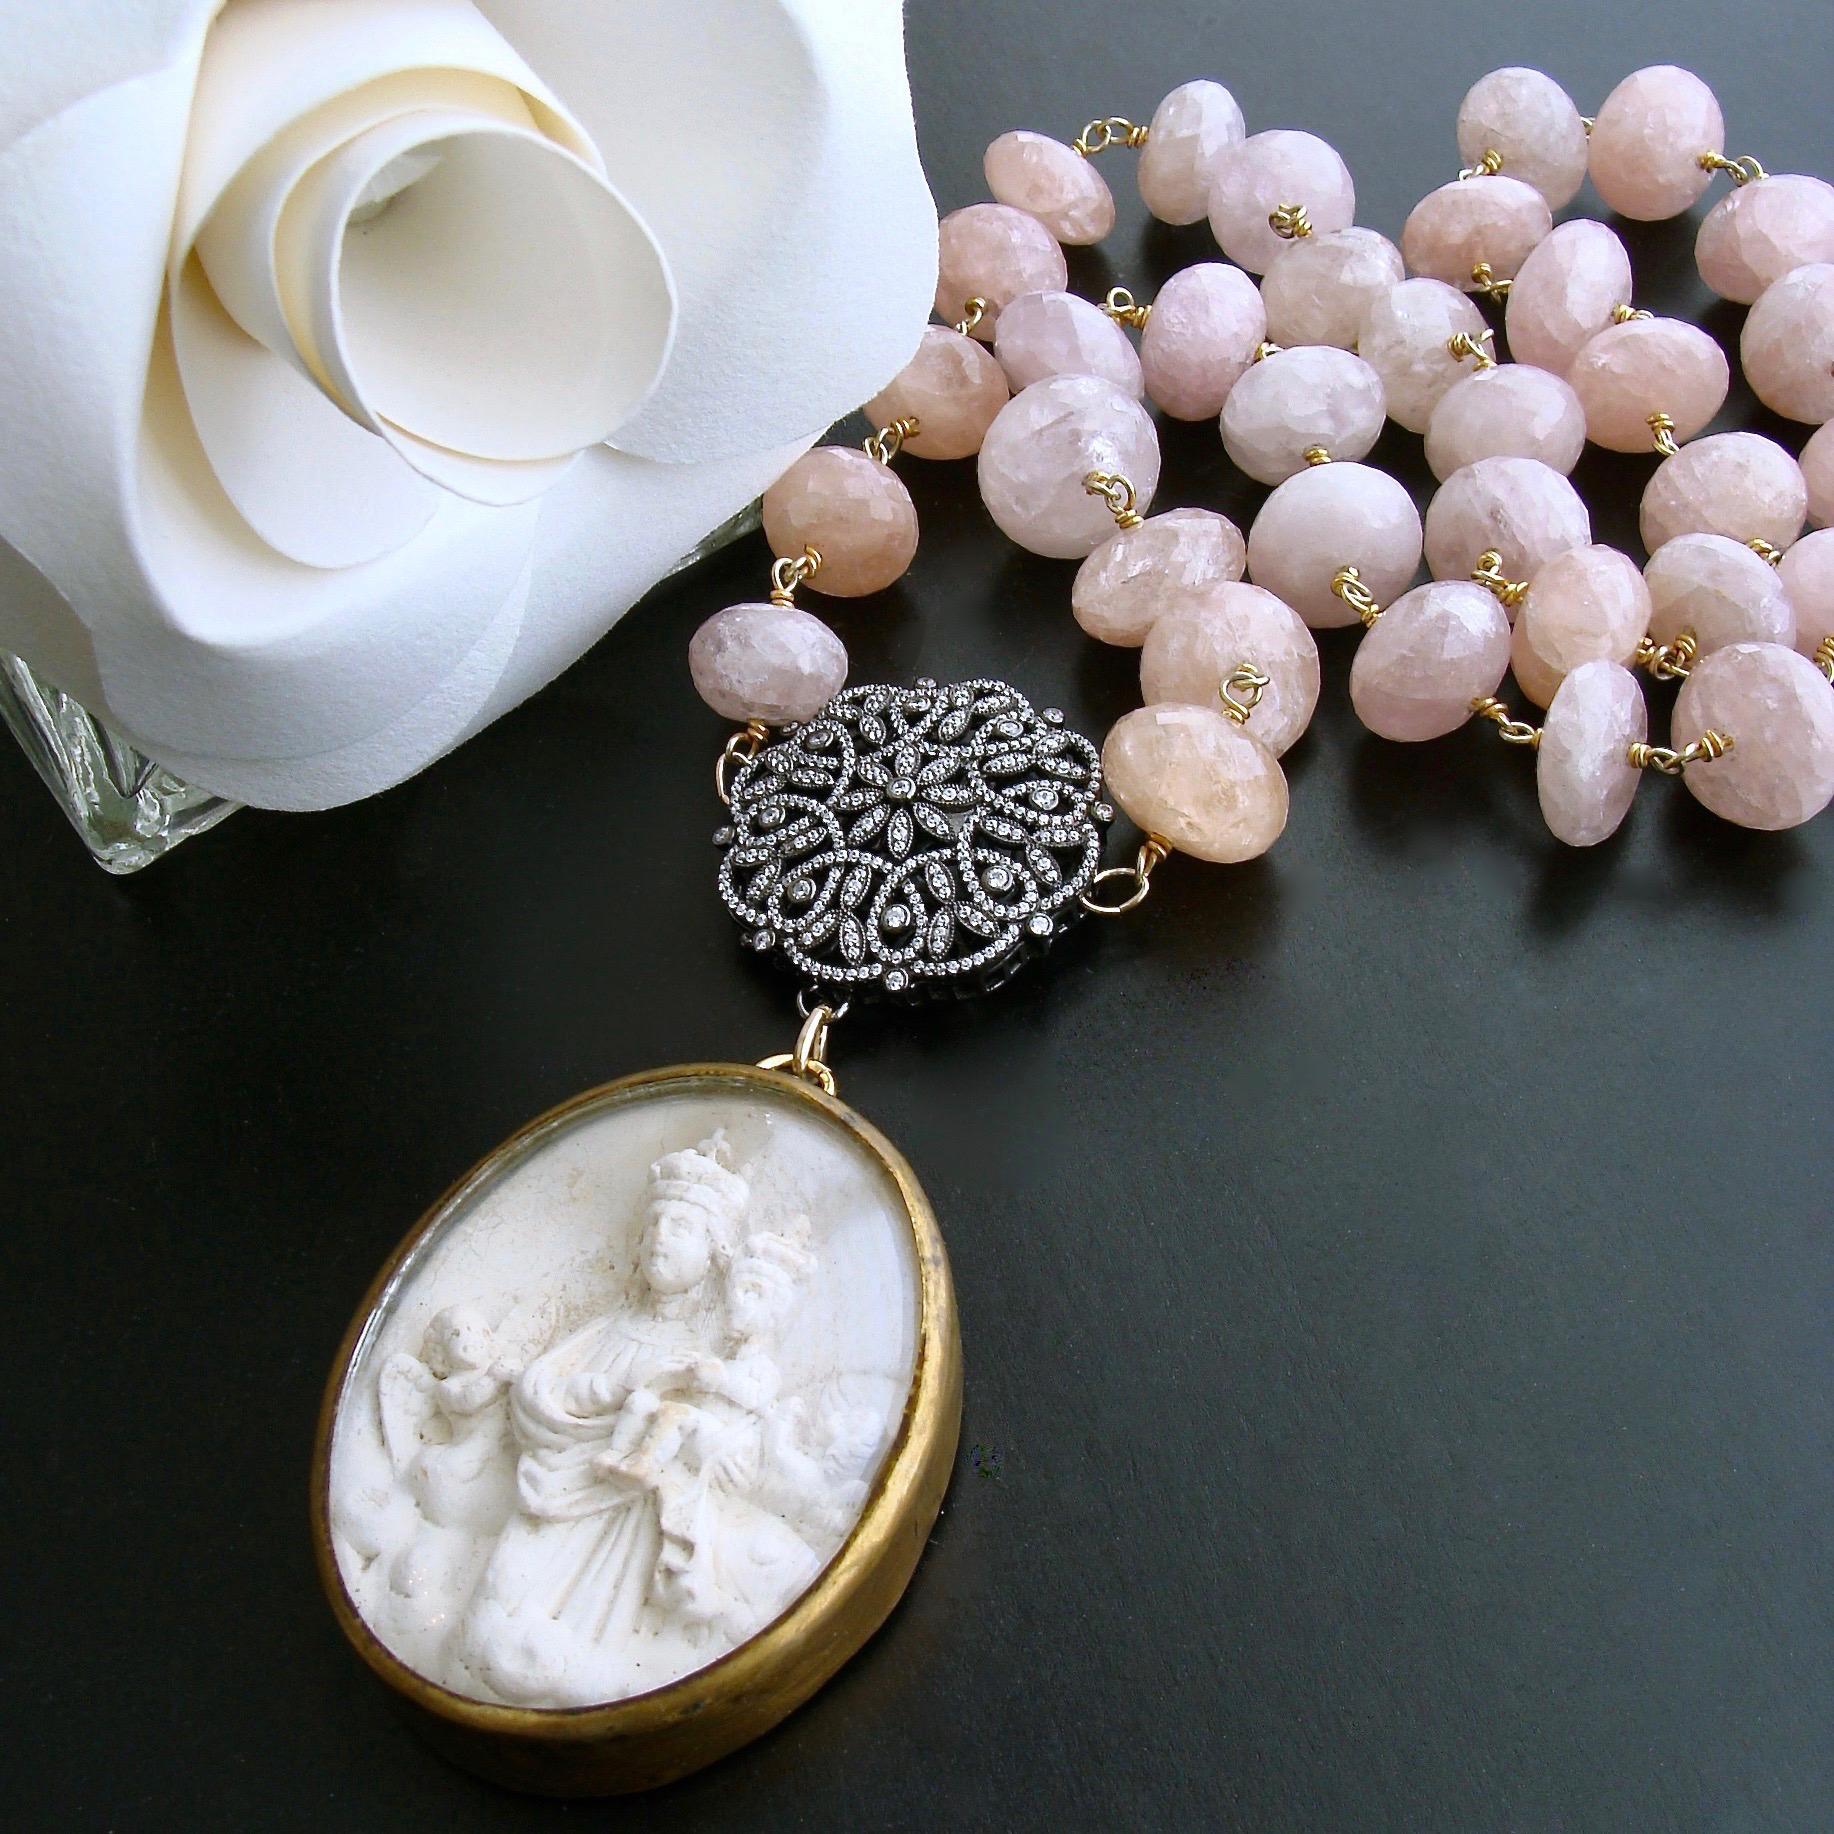 Artisan Pink Morganite Filigree Clasp with French Meerschaum Reliquary Ex Voto Pendant For Sale